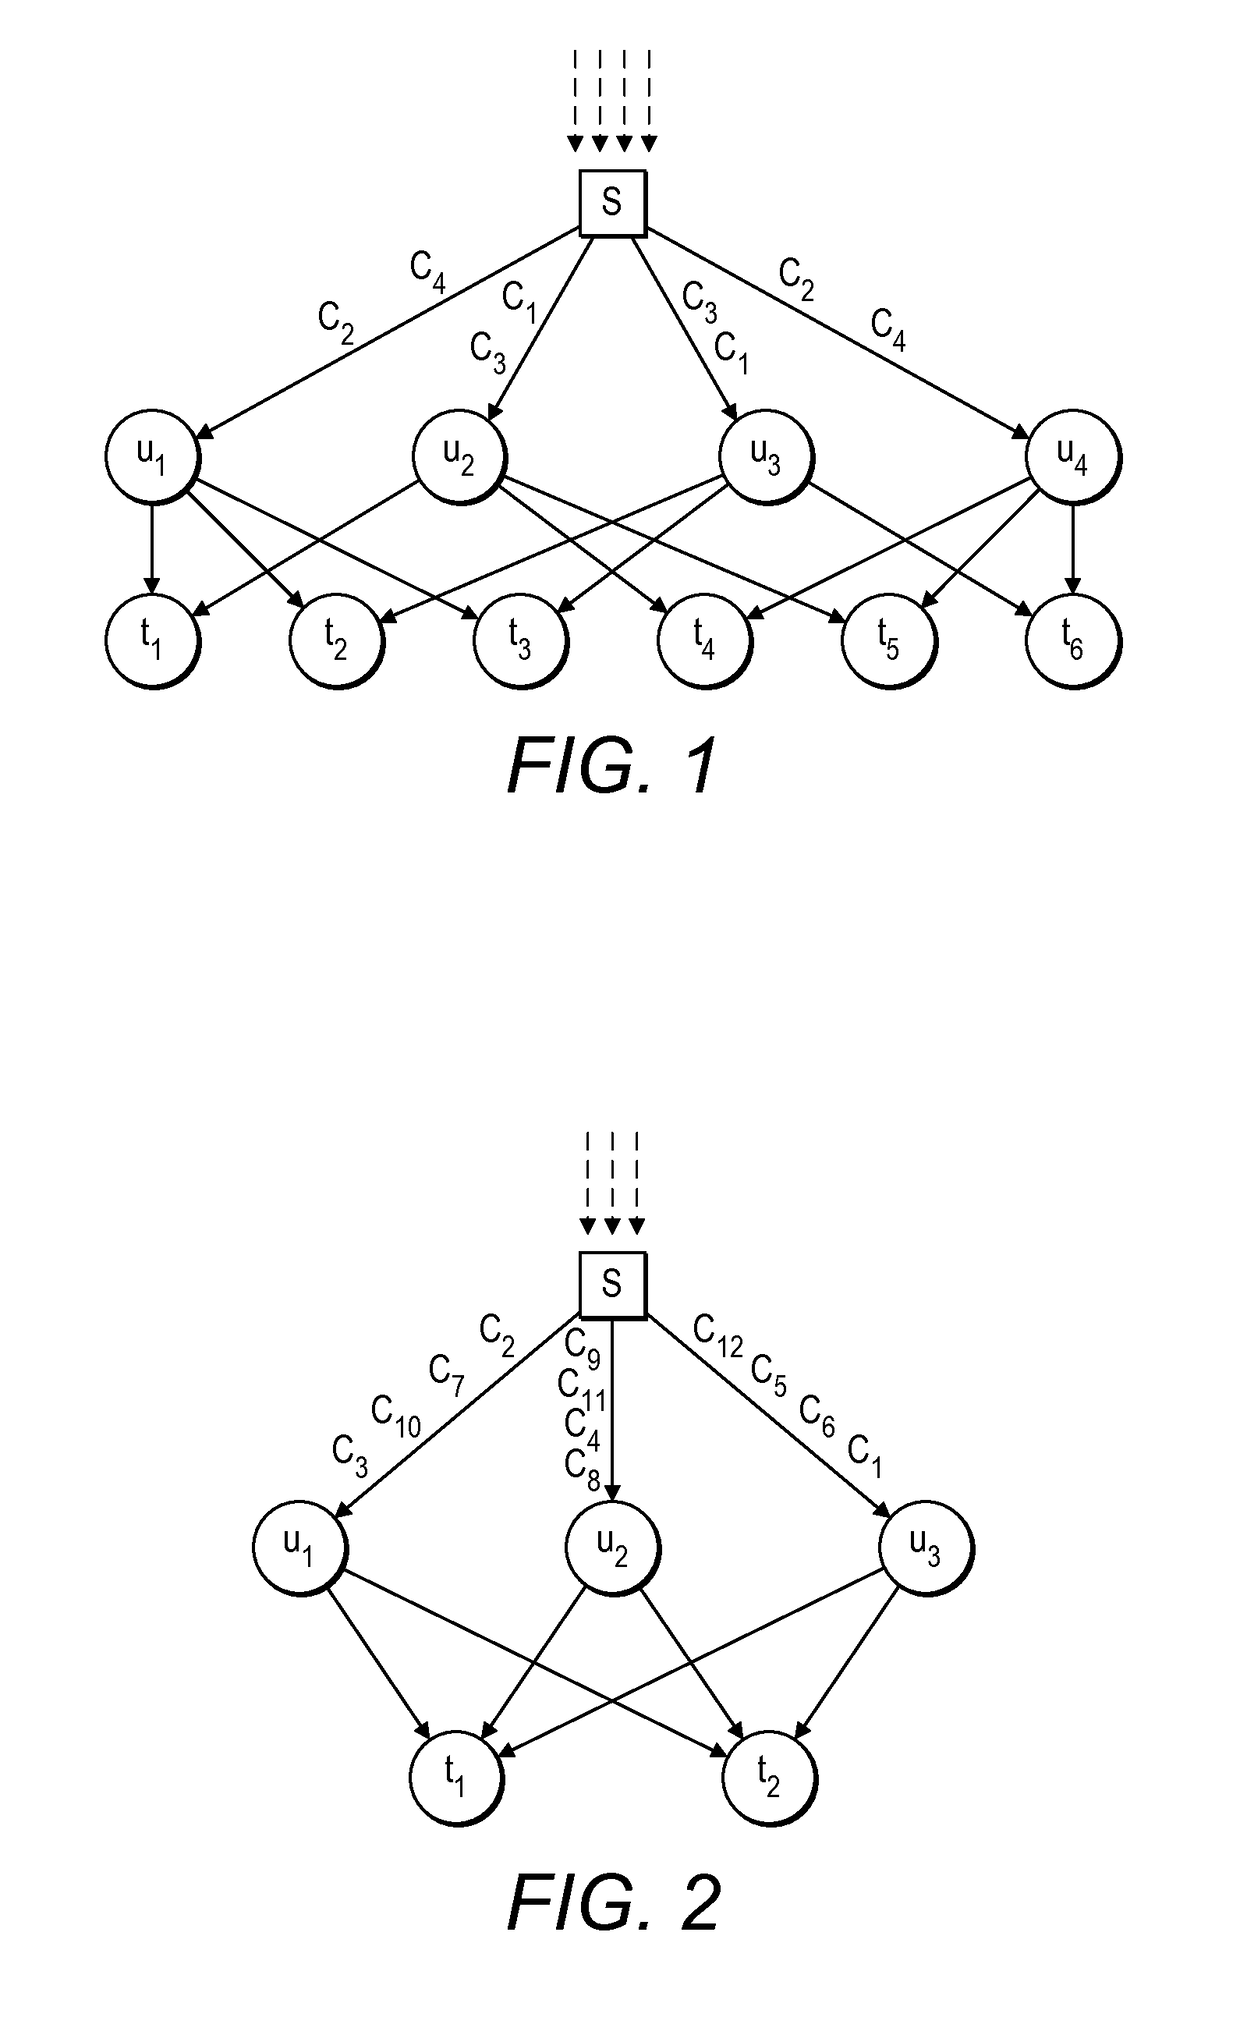 Network coding over GF(2)